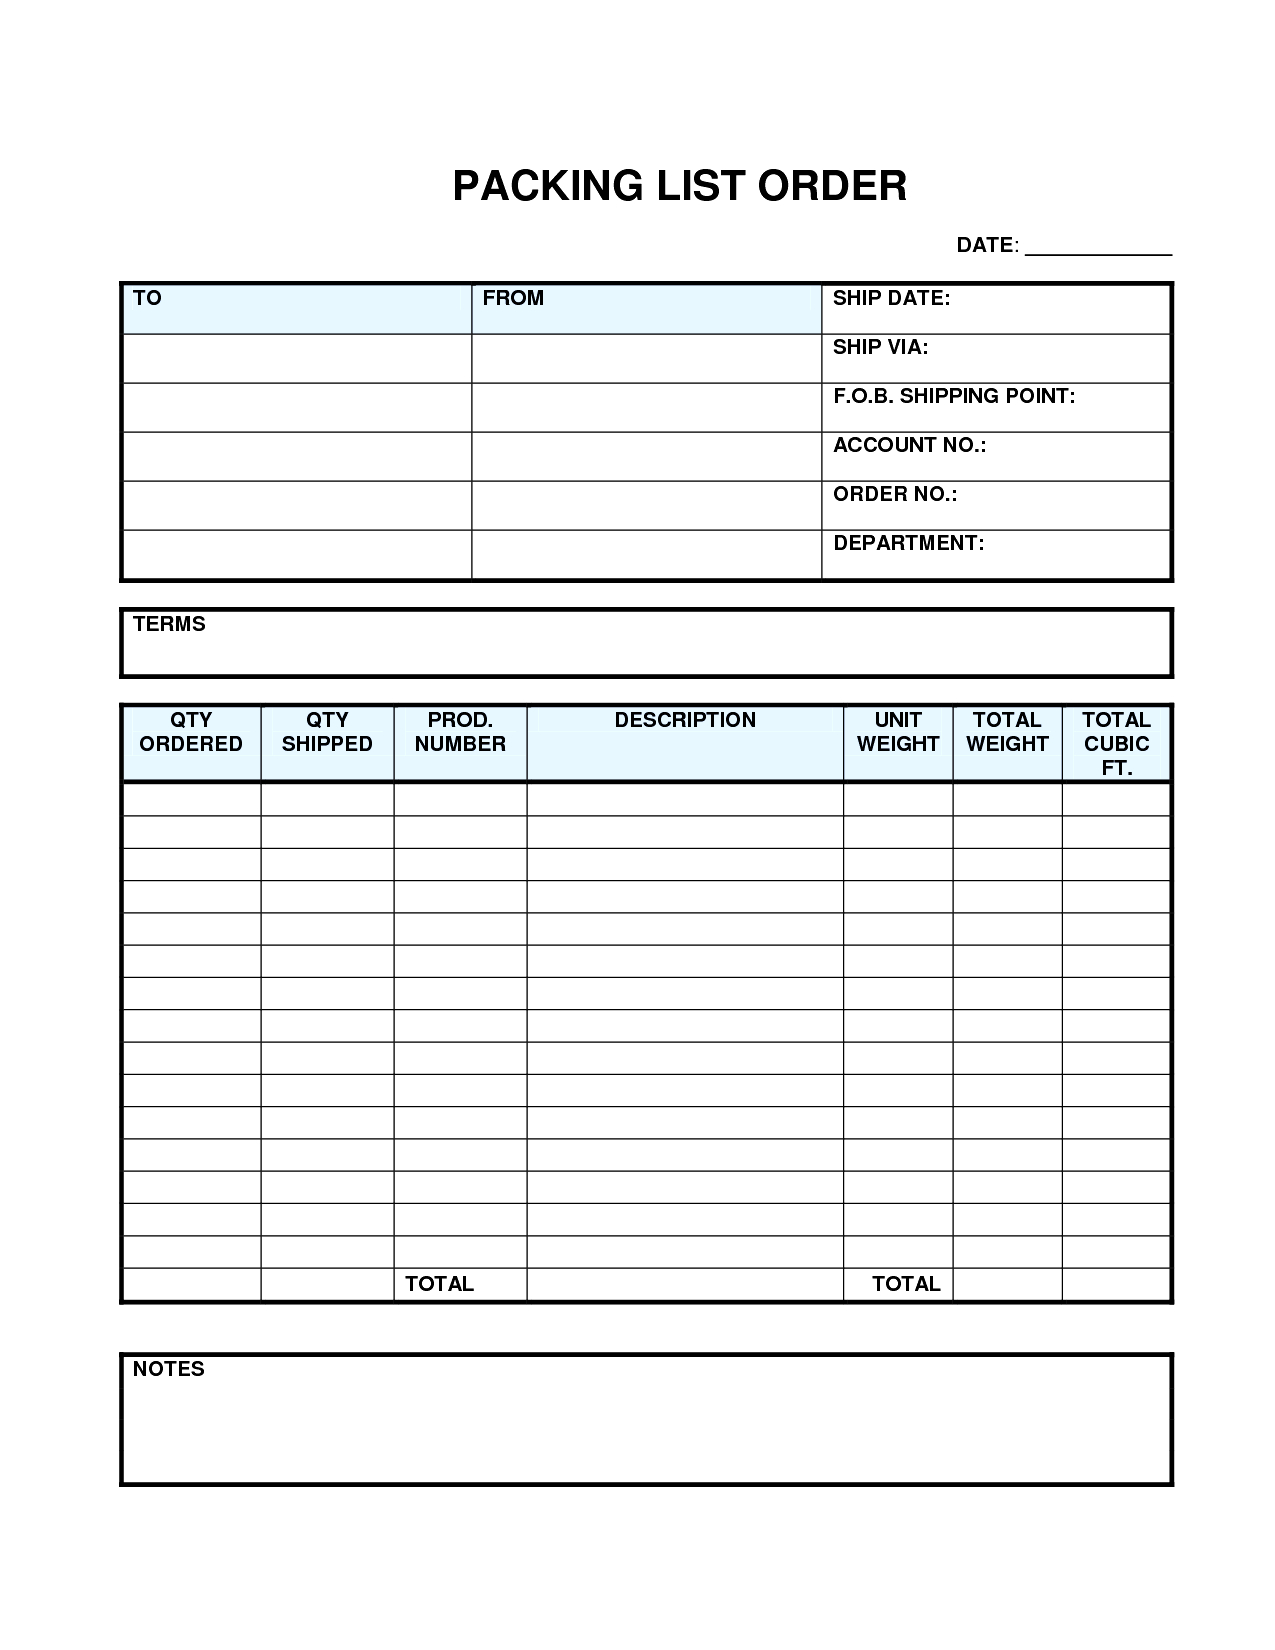 011 Birchlane Packing Slip Free Template Sensational Ideas With Regard To Commercial Invoice Packing List Template